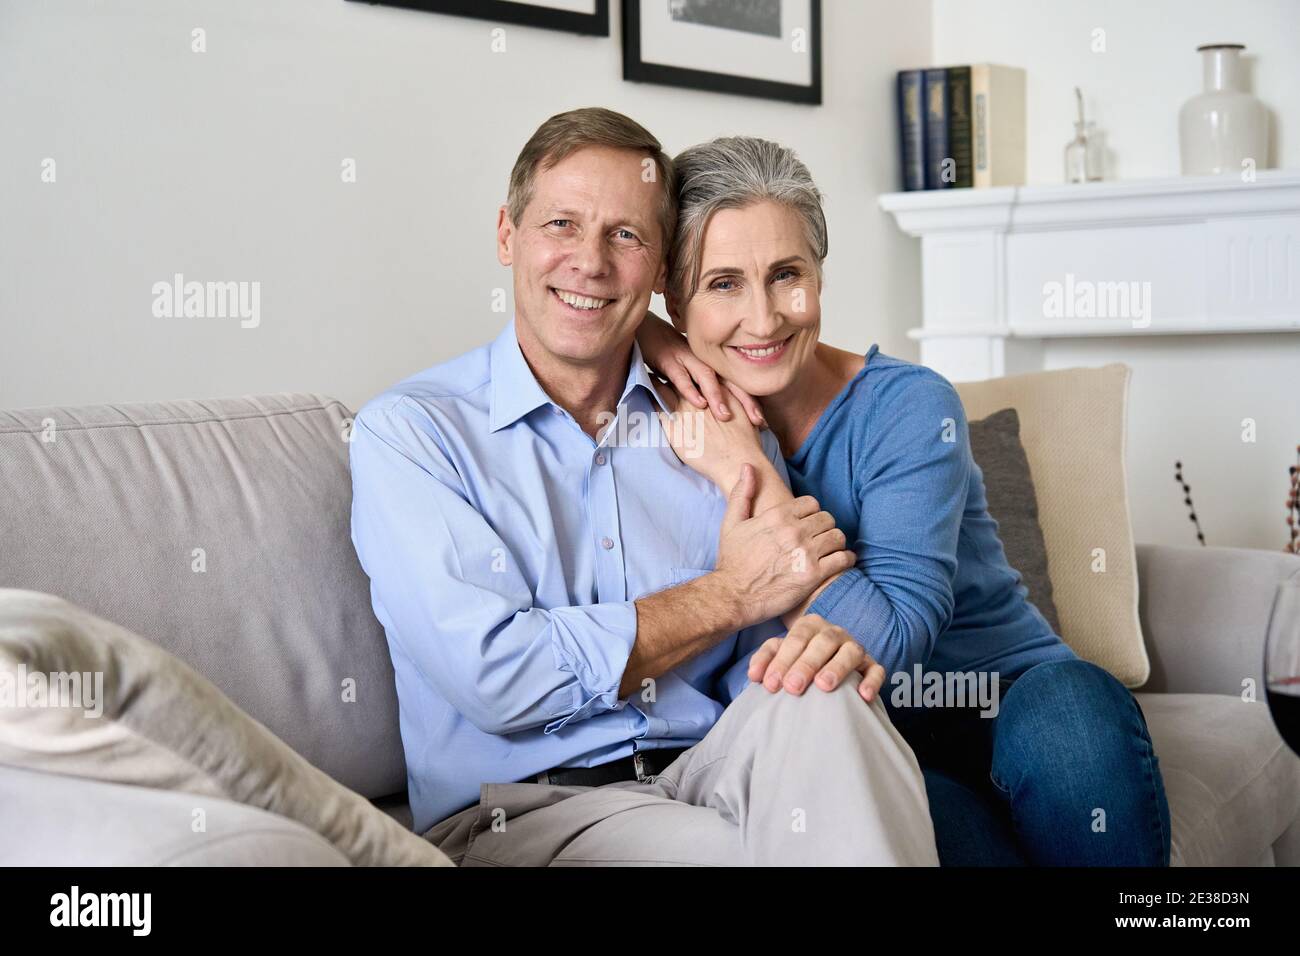 Happy older couple hugging, looking at camera, sitting on couch in apartment. Stock Photo